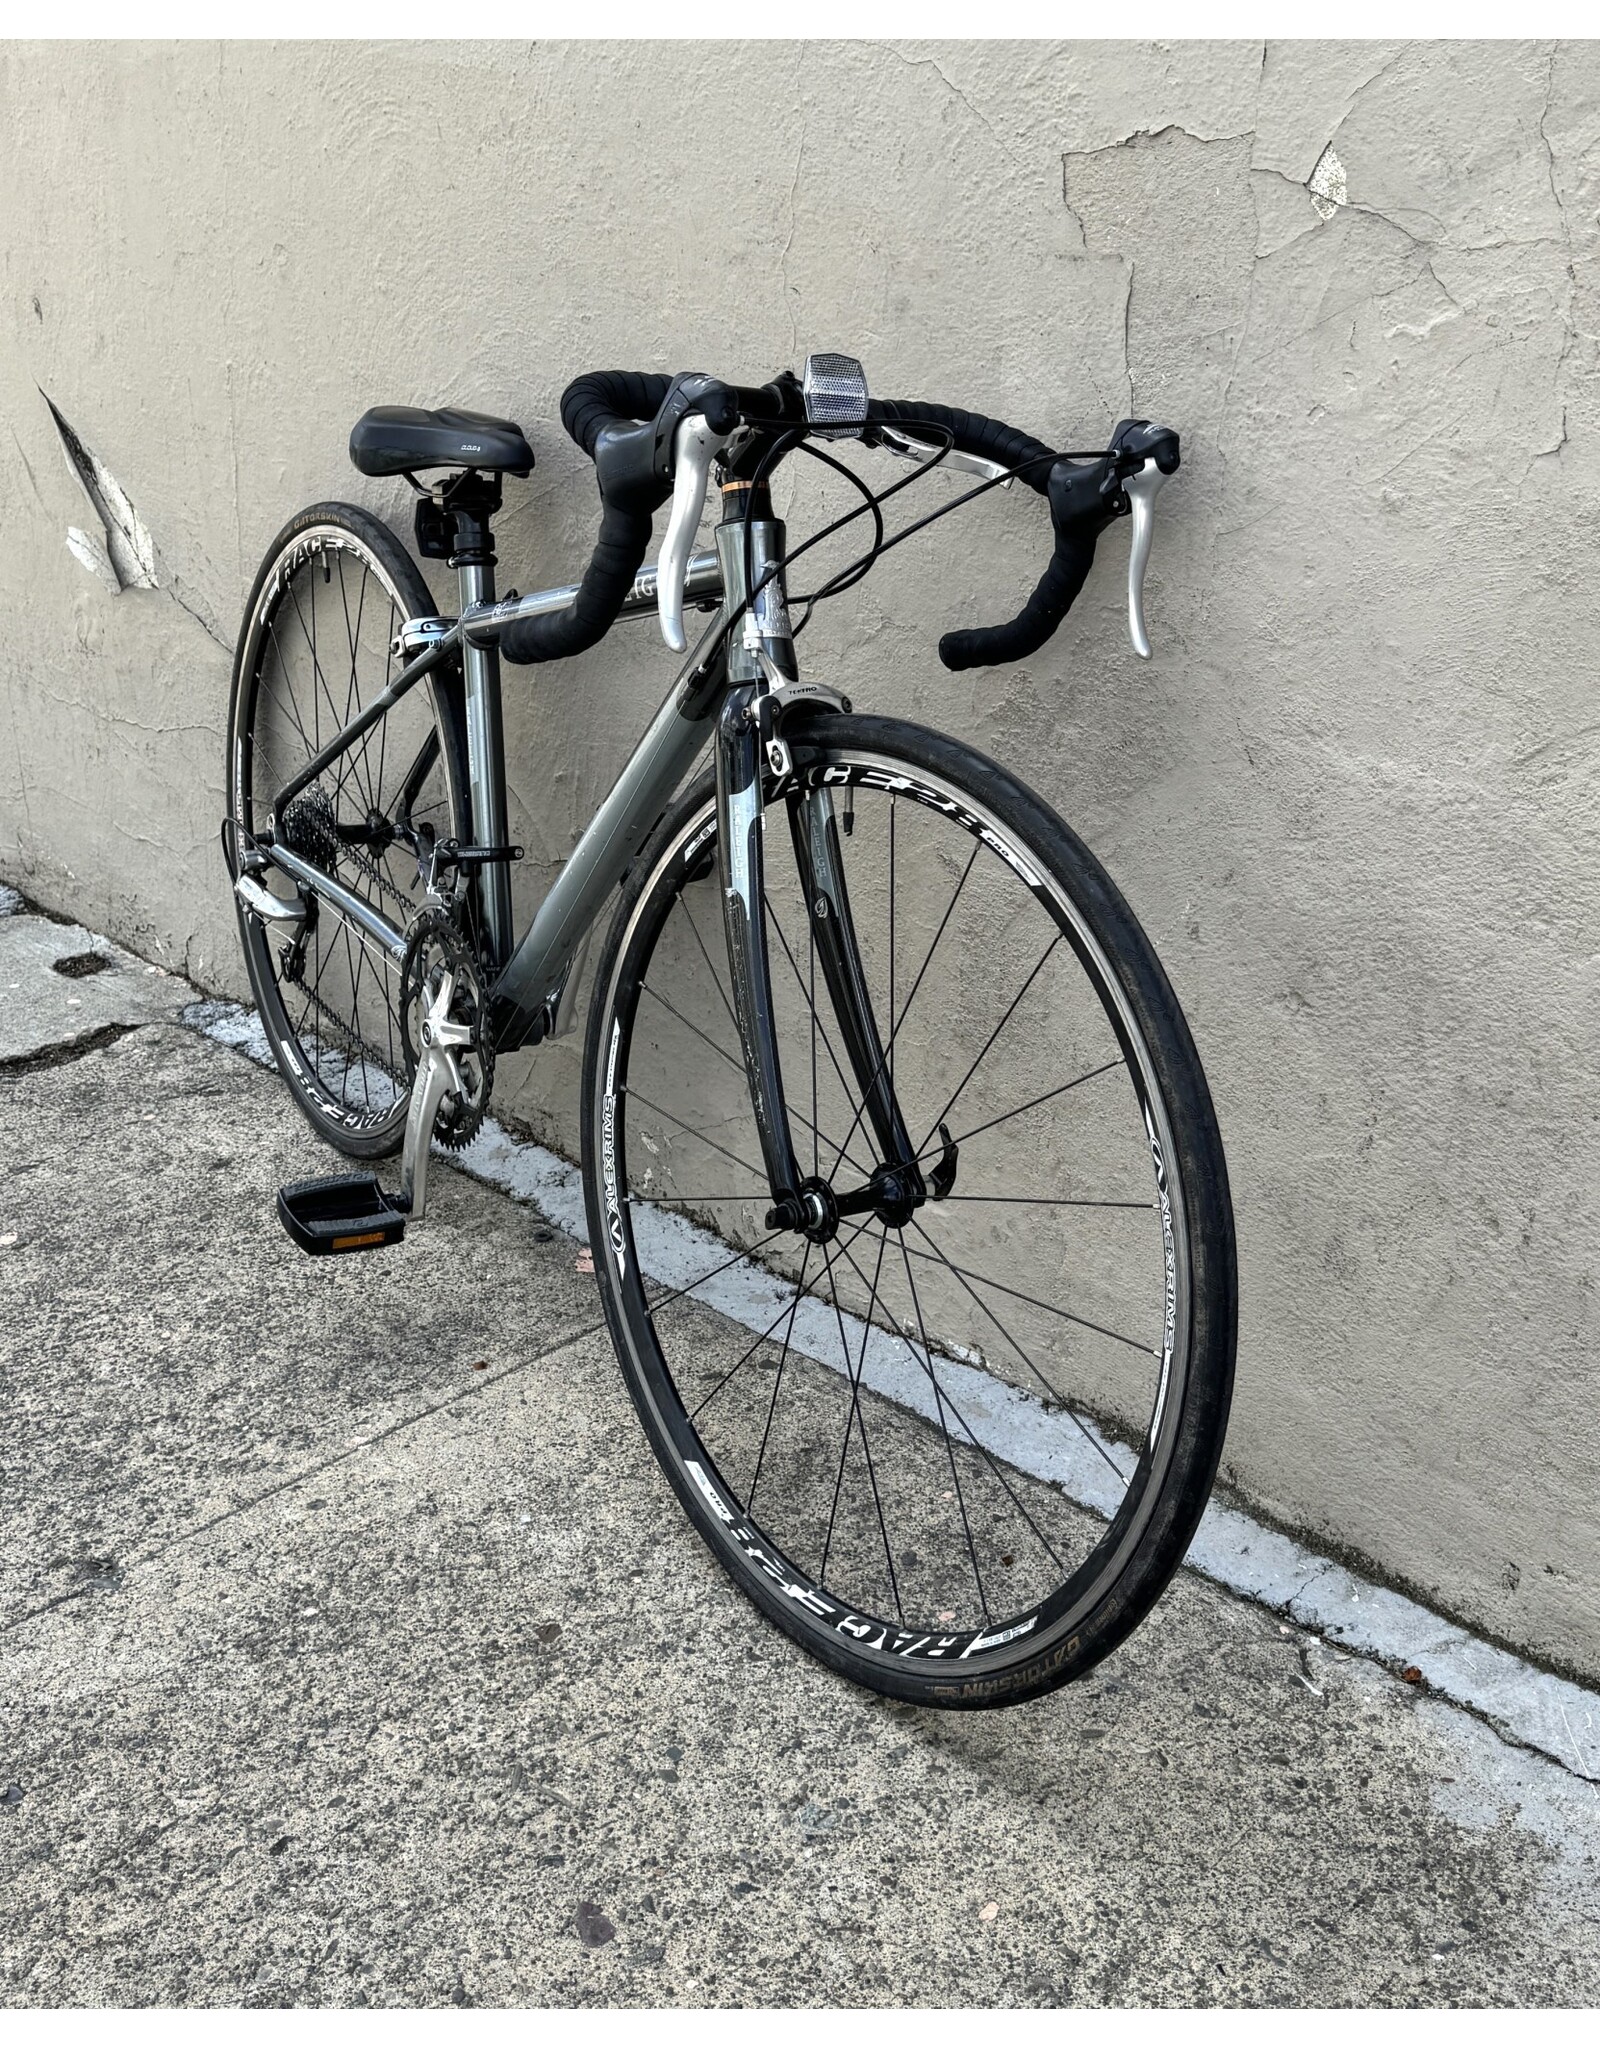 Raleigh Raleigh Cadent 1.0, 17 Inches, Gray